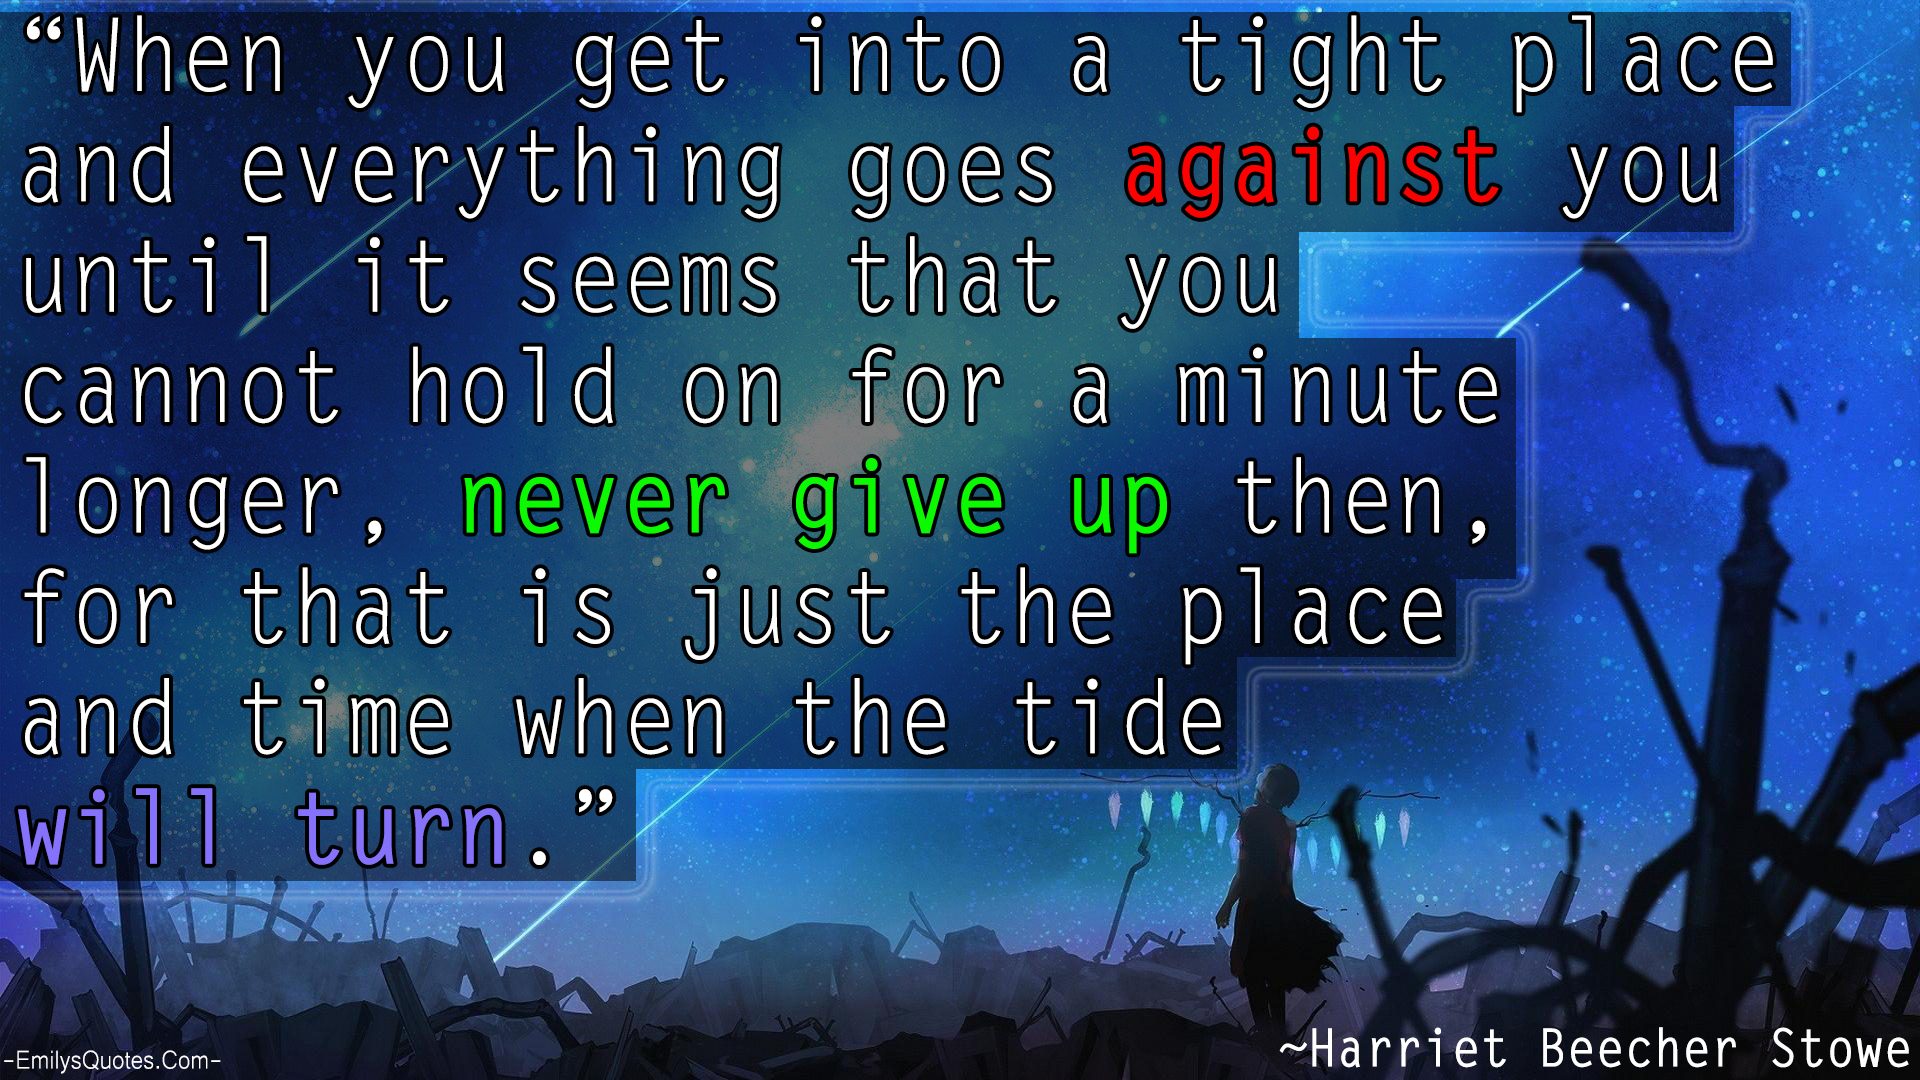 When you get into a tight place and everything goes against you until it seems that you cannot hold on for a minute longer, never give up then, for that is just the place and time when the tide will turn